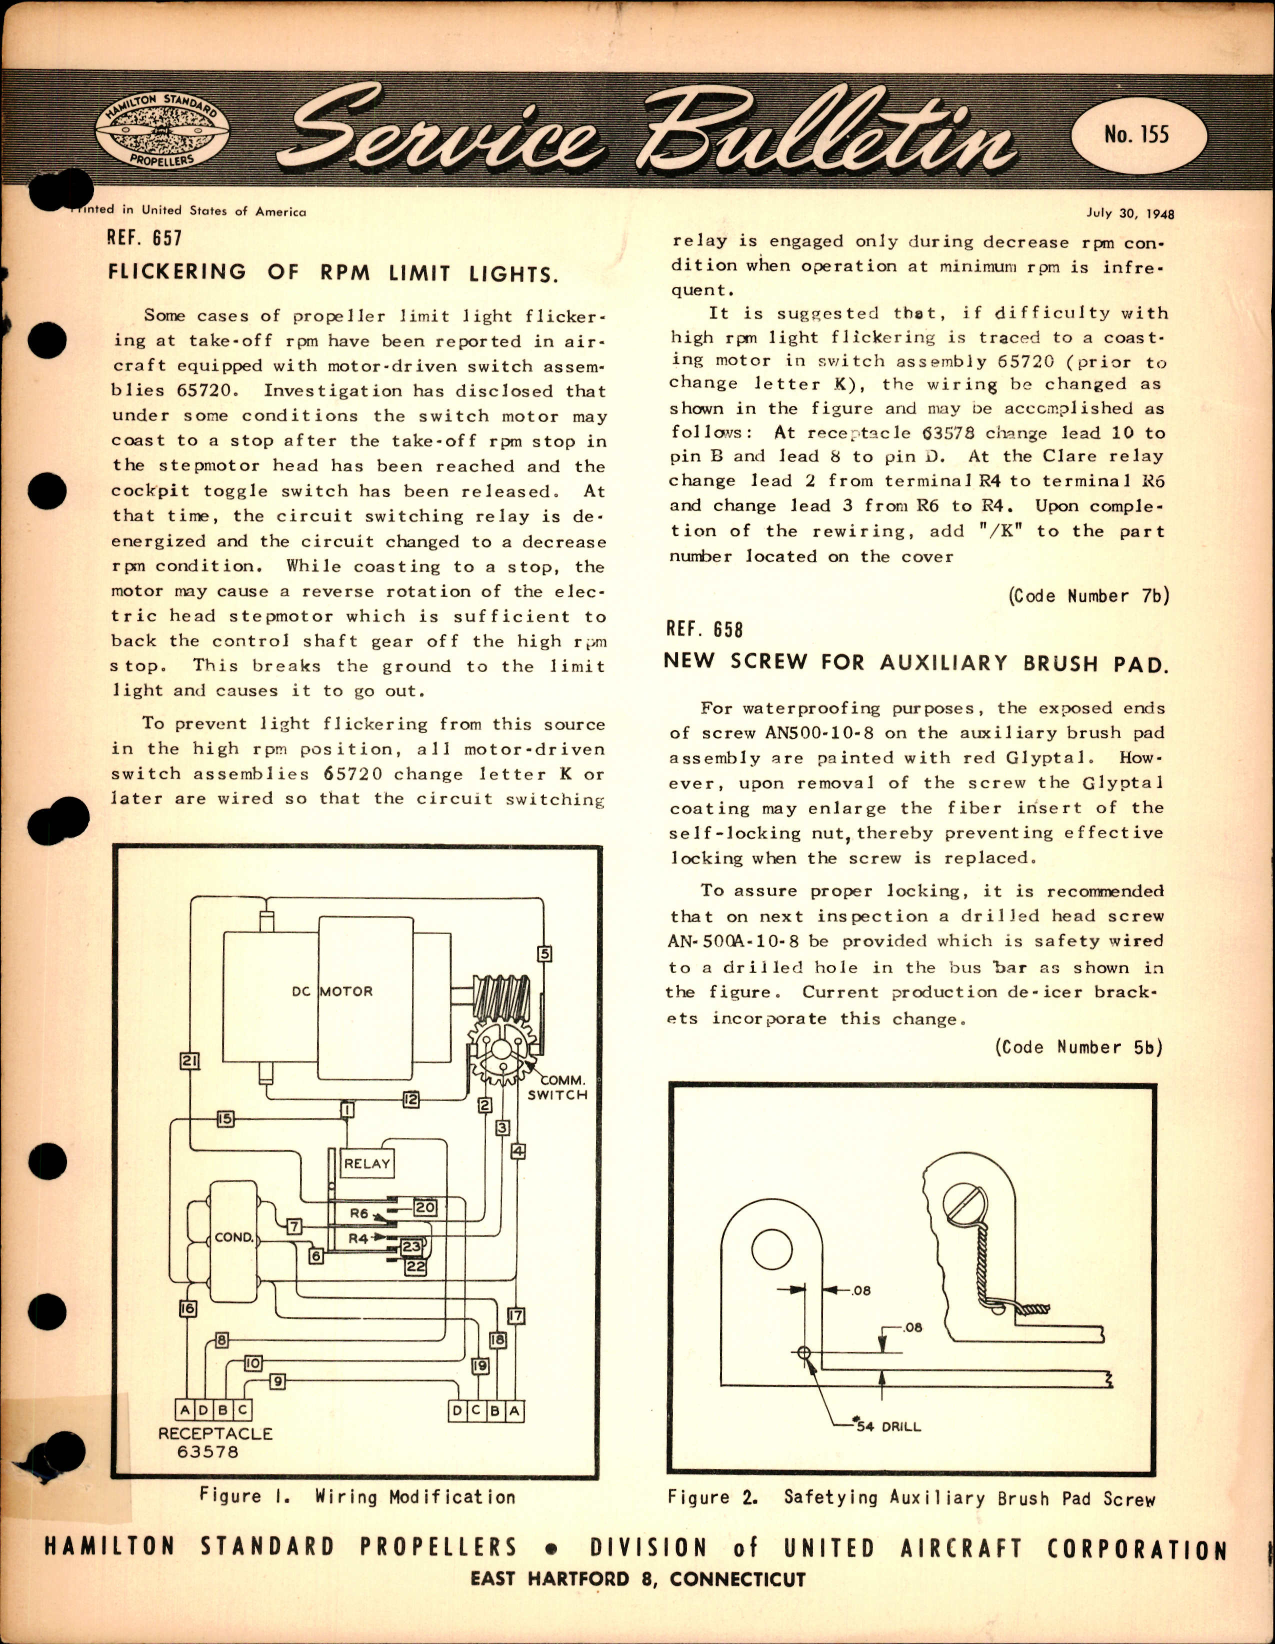 Sample page 1 from AirCorps Library document: Flickering of RPM Limit Lights, Ref 657